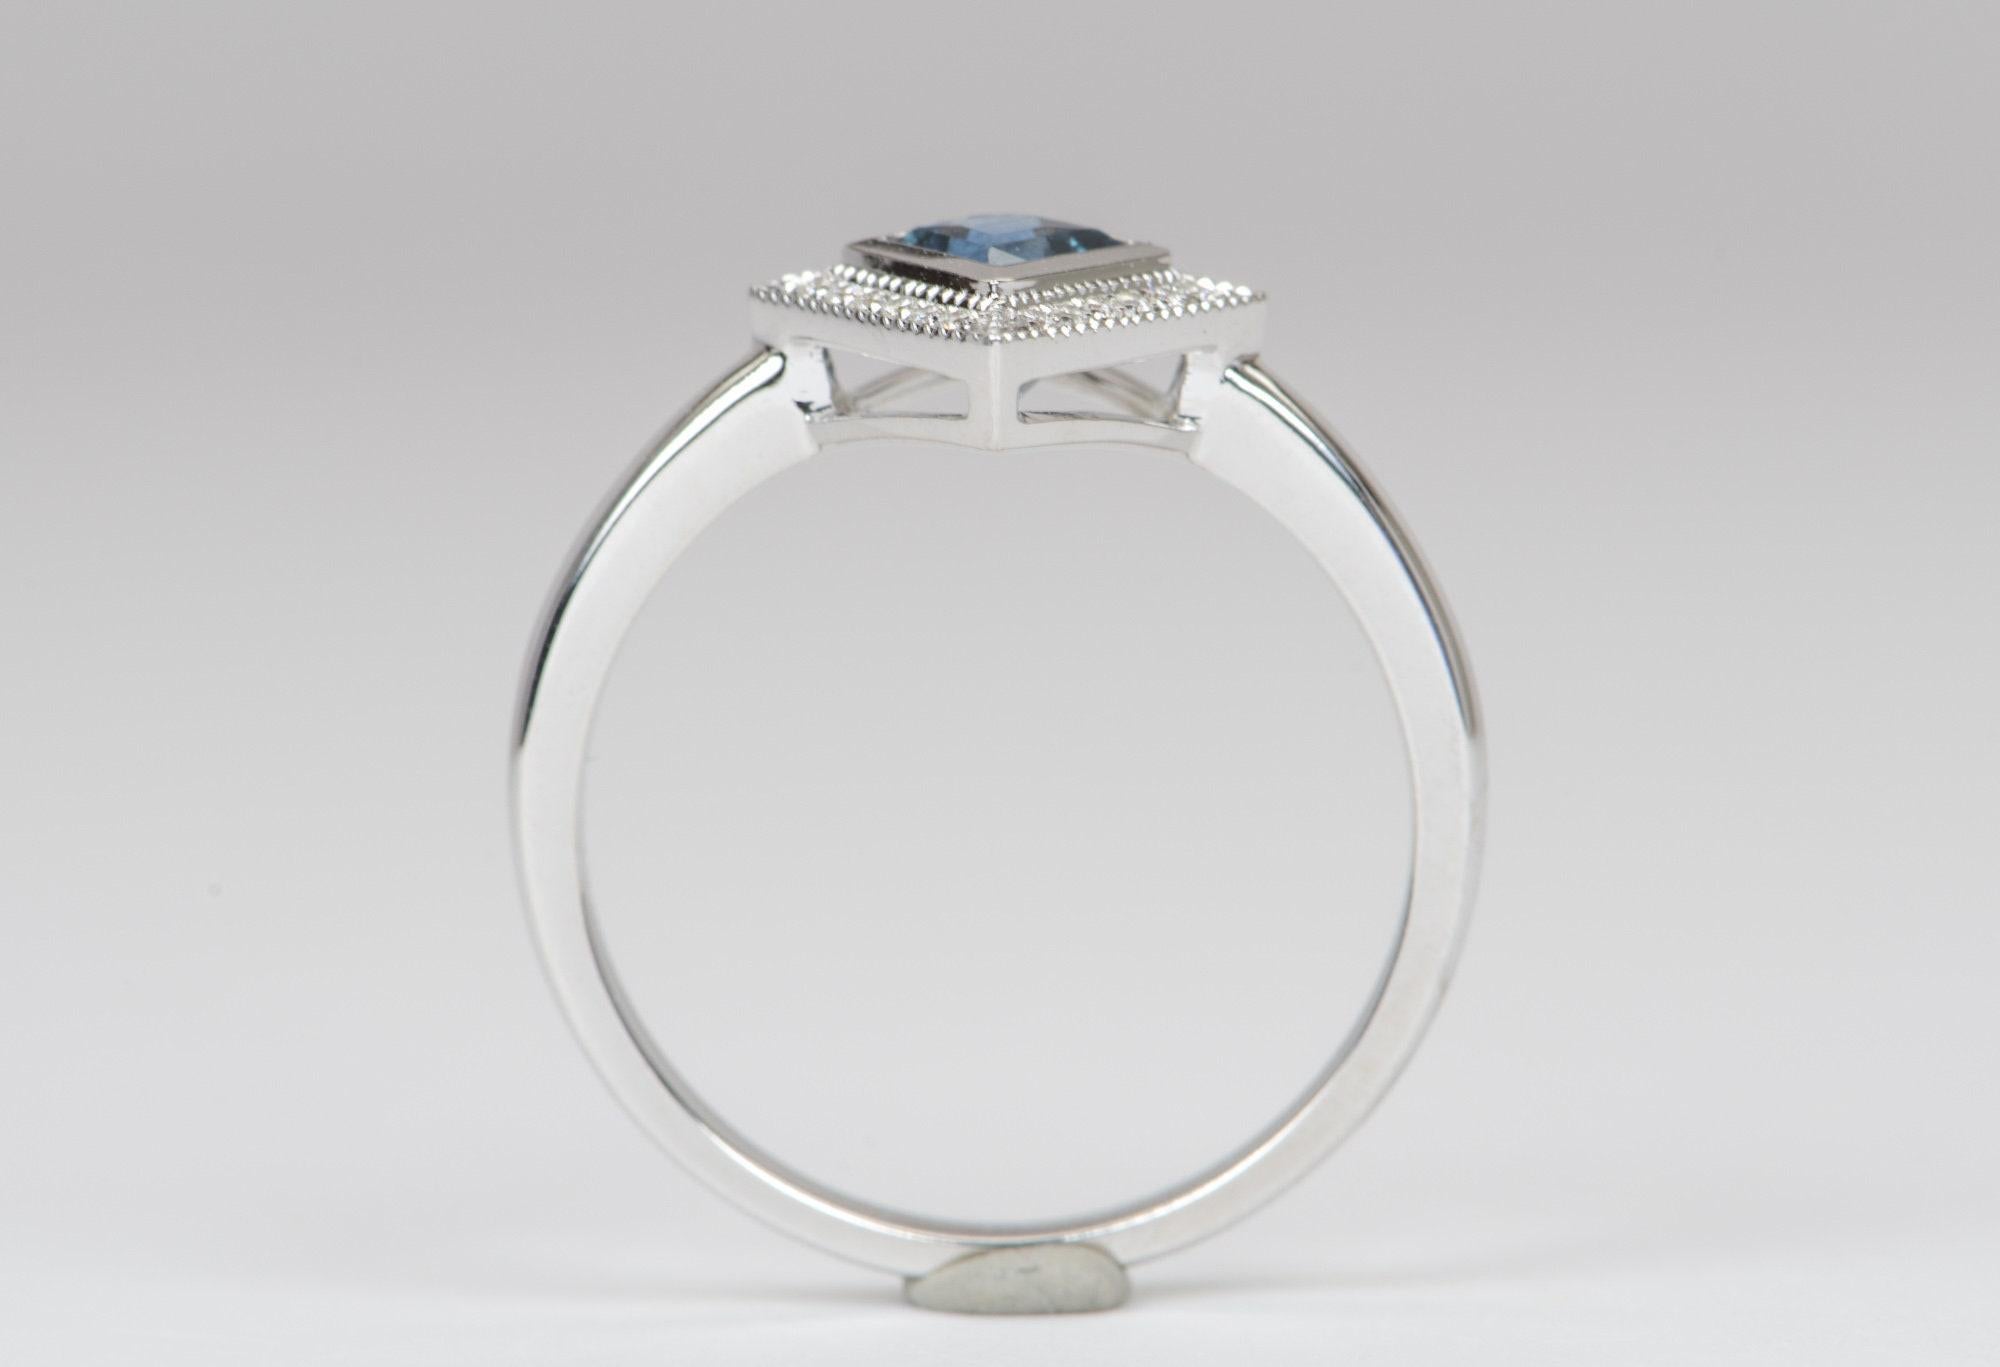 ♥  Solid 14K gold ring set with a kite shaped Montana sapphire in the center, flanked with a diamond halo.
♥  The ring is lined with delicate hand-engraved milgrain edges for a vintage-inspired look.
♥  The overall setting measures 10.6mm in width,